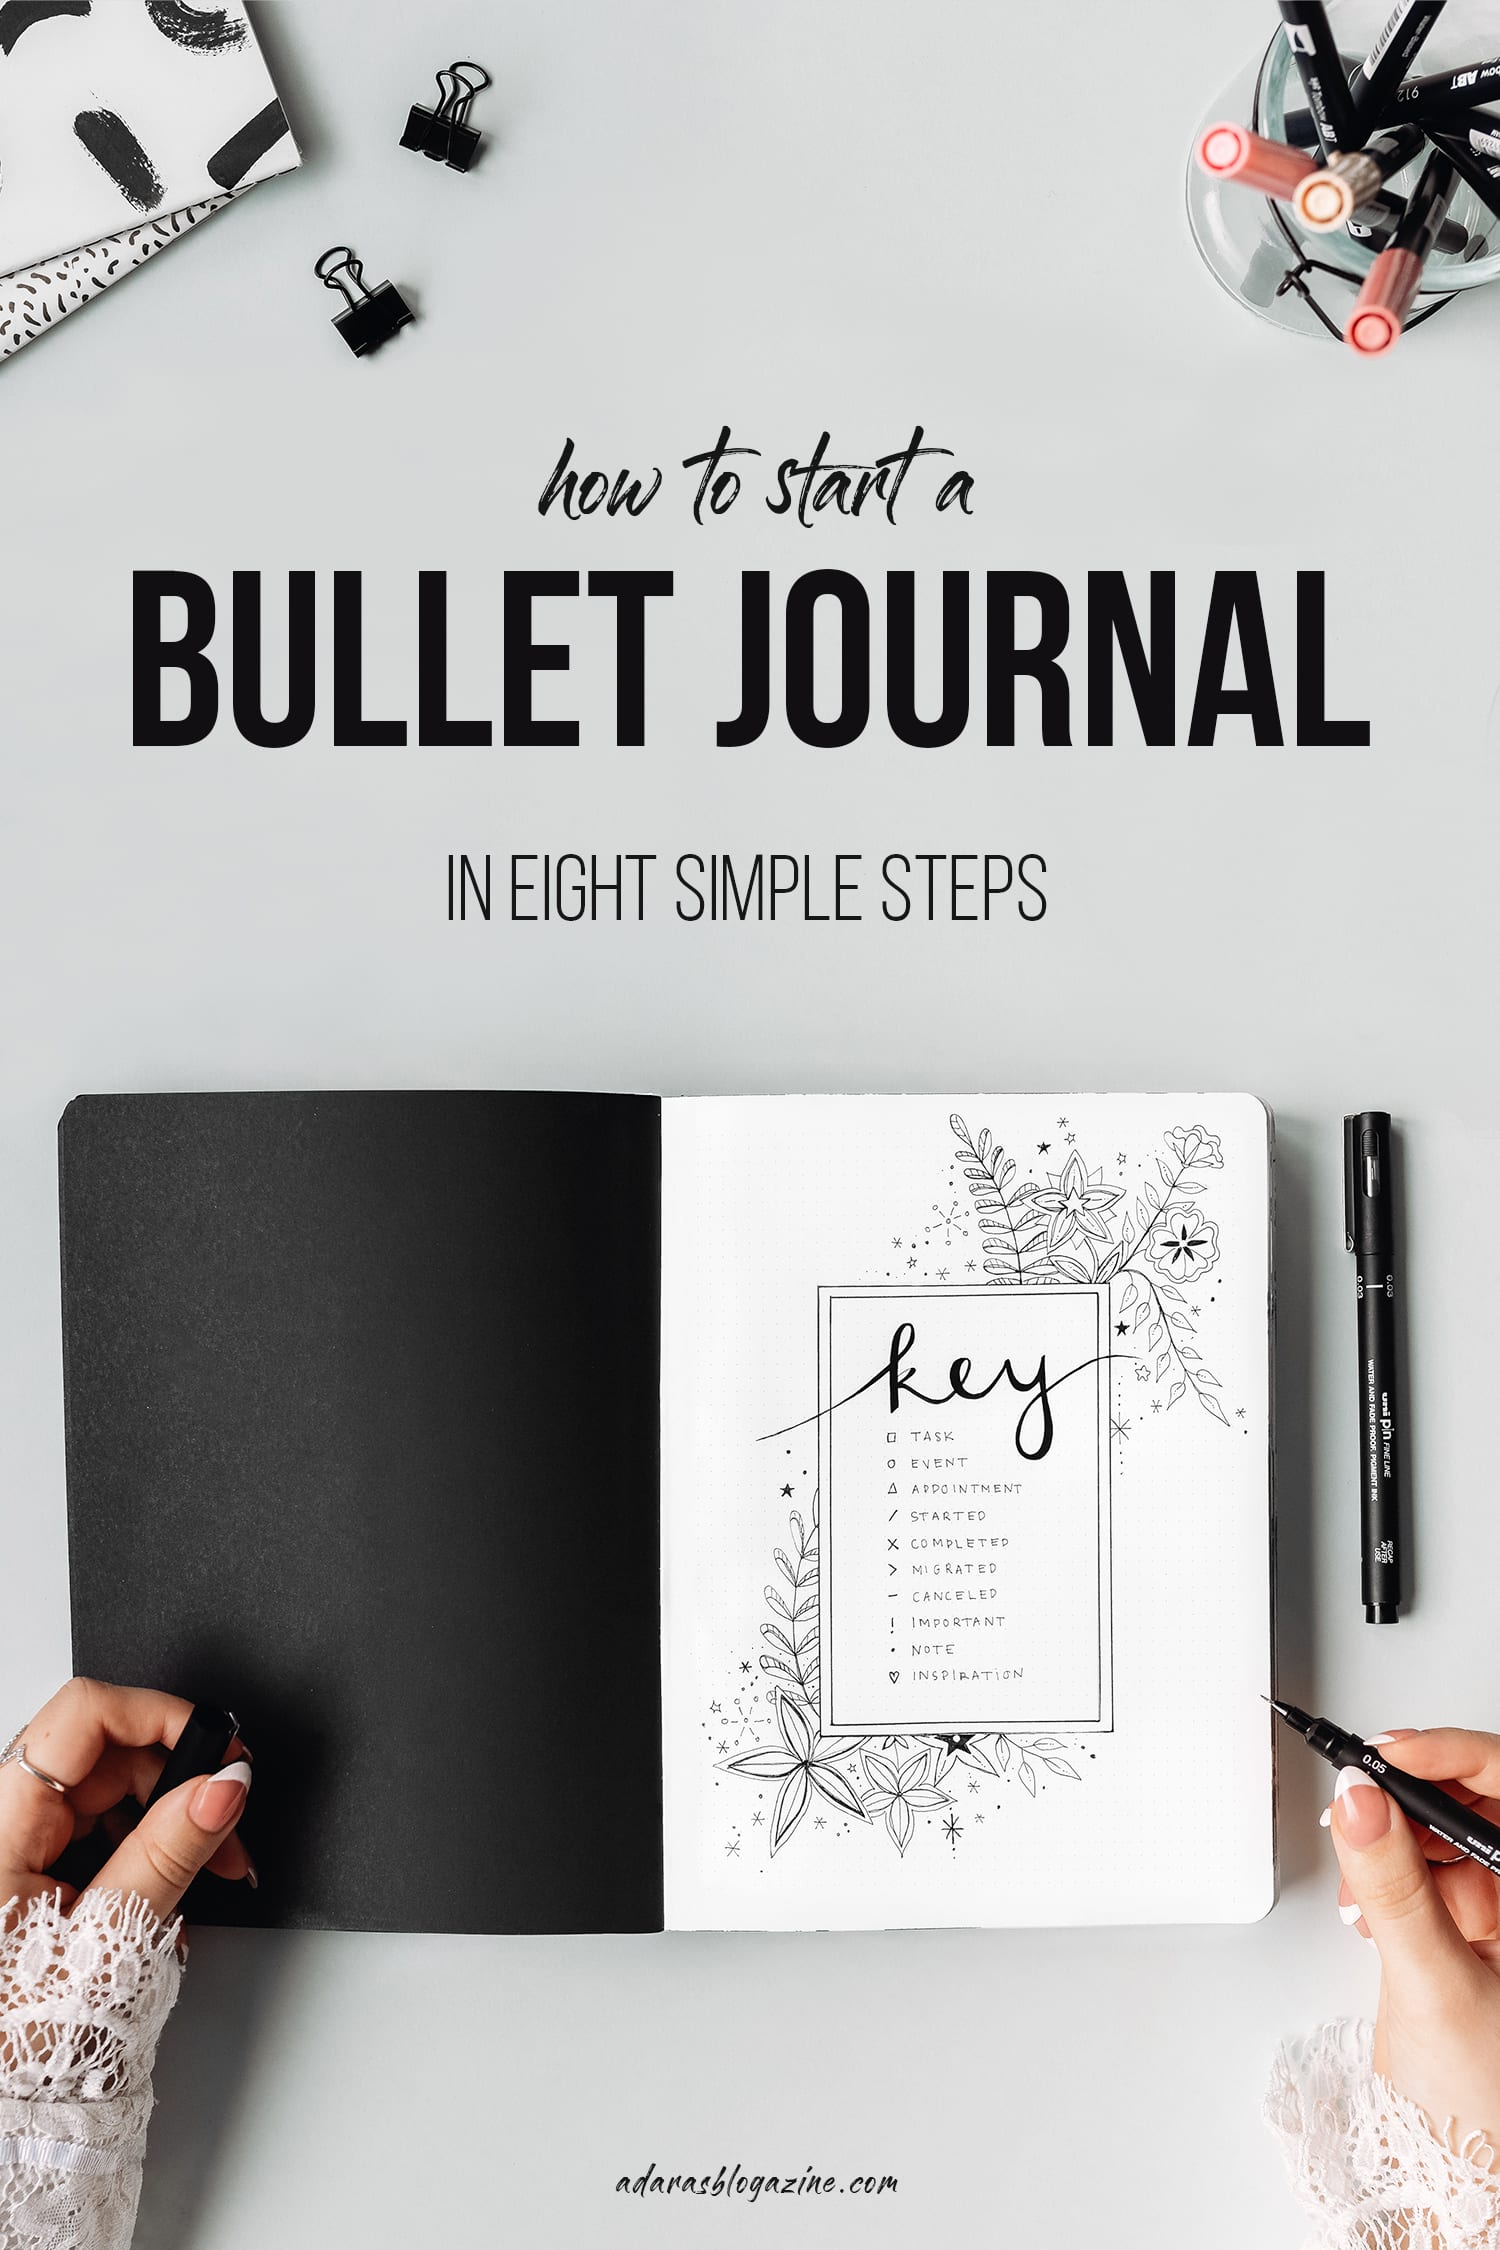 https://adarasblogazine.com/how-to-start-a-bullet-journal/how-to-start-a-bujo-complete-guide/